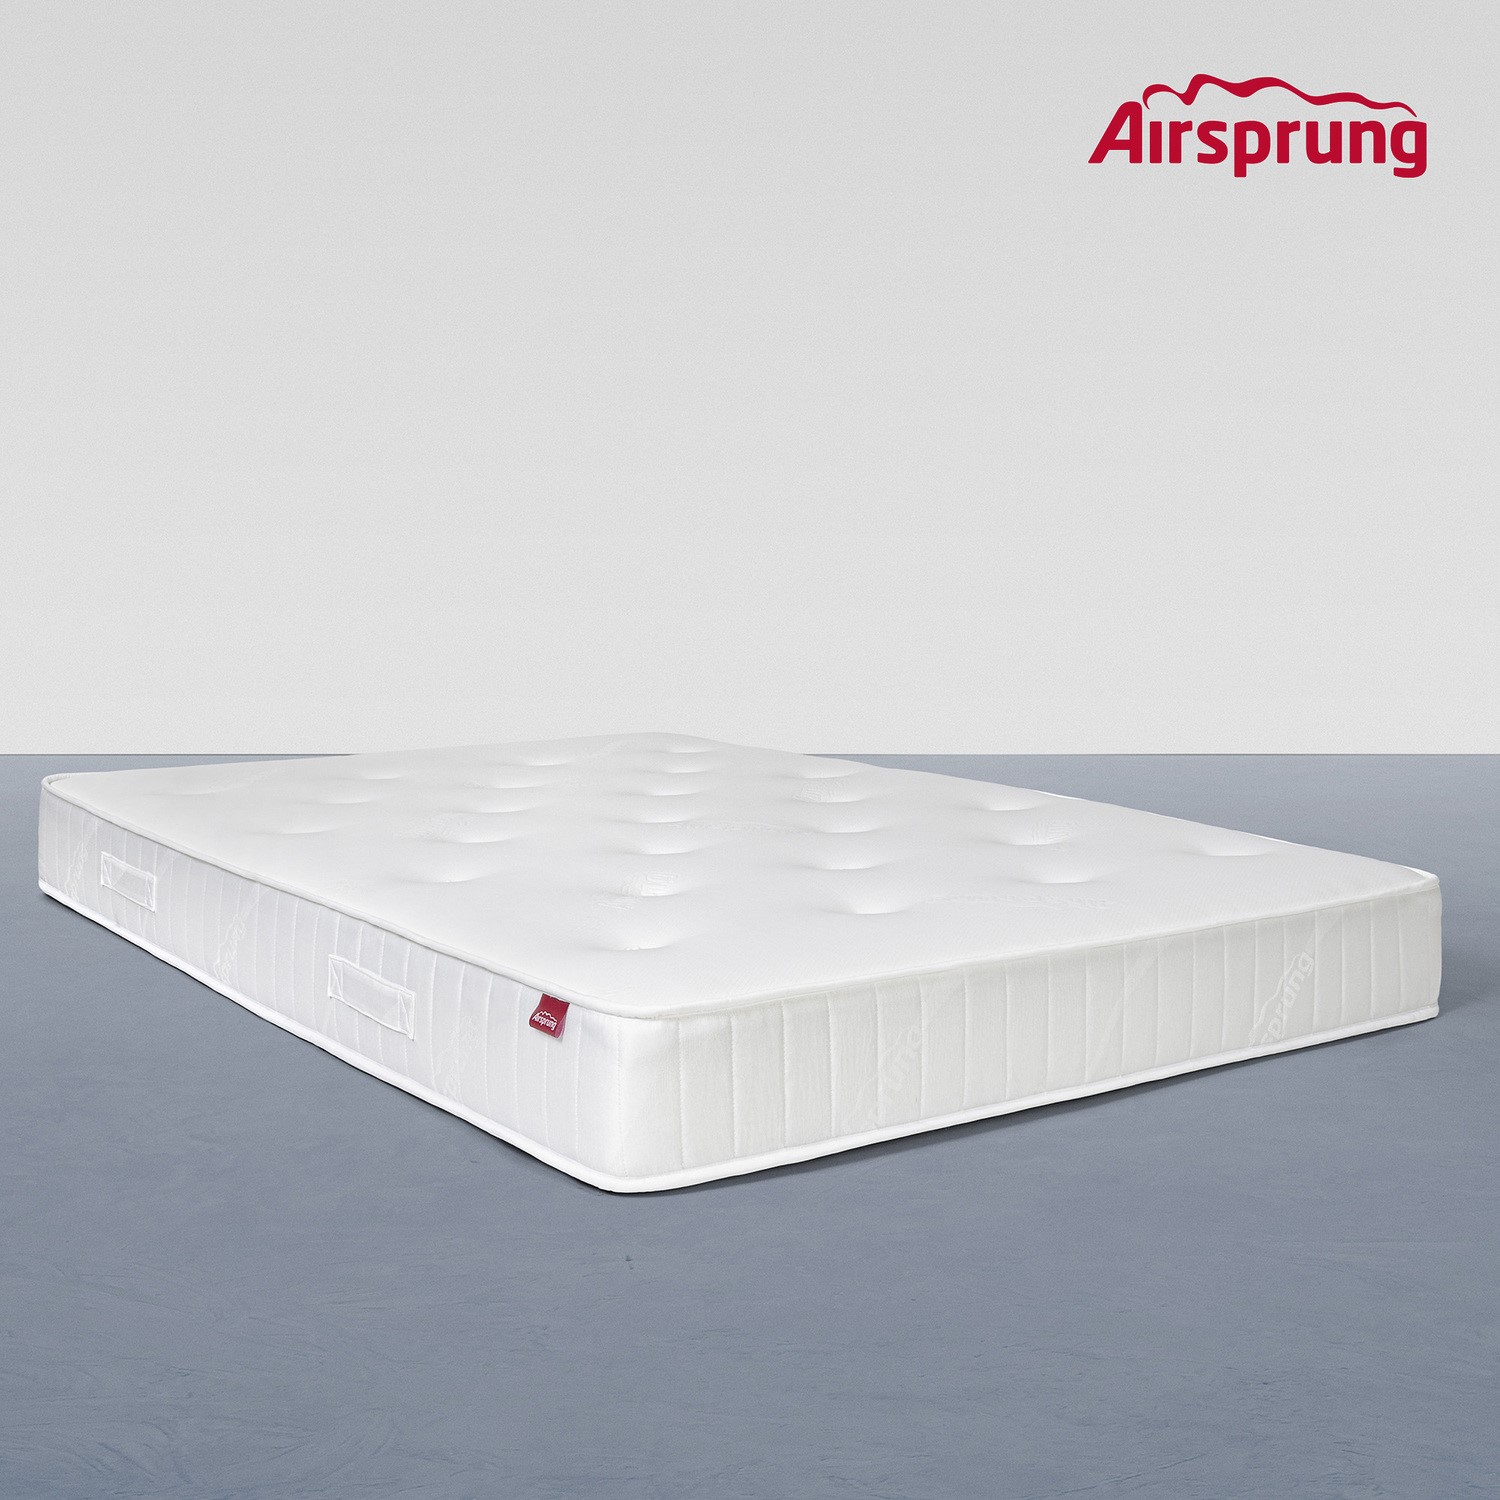 Read more about Double rolled extra firm open coil spring mattress airsprung